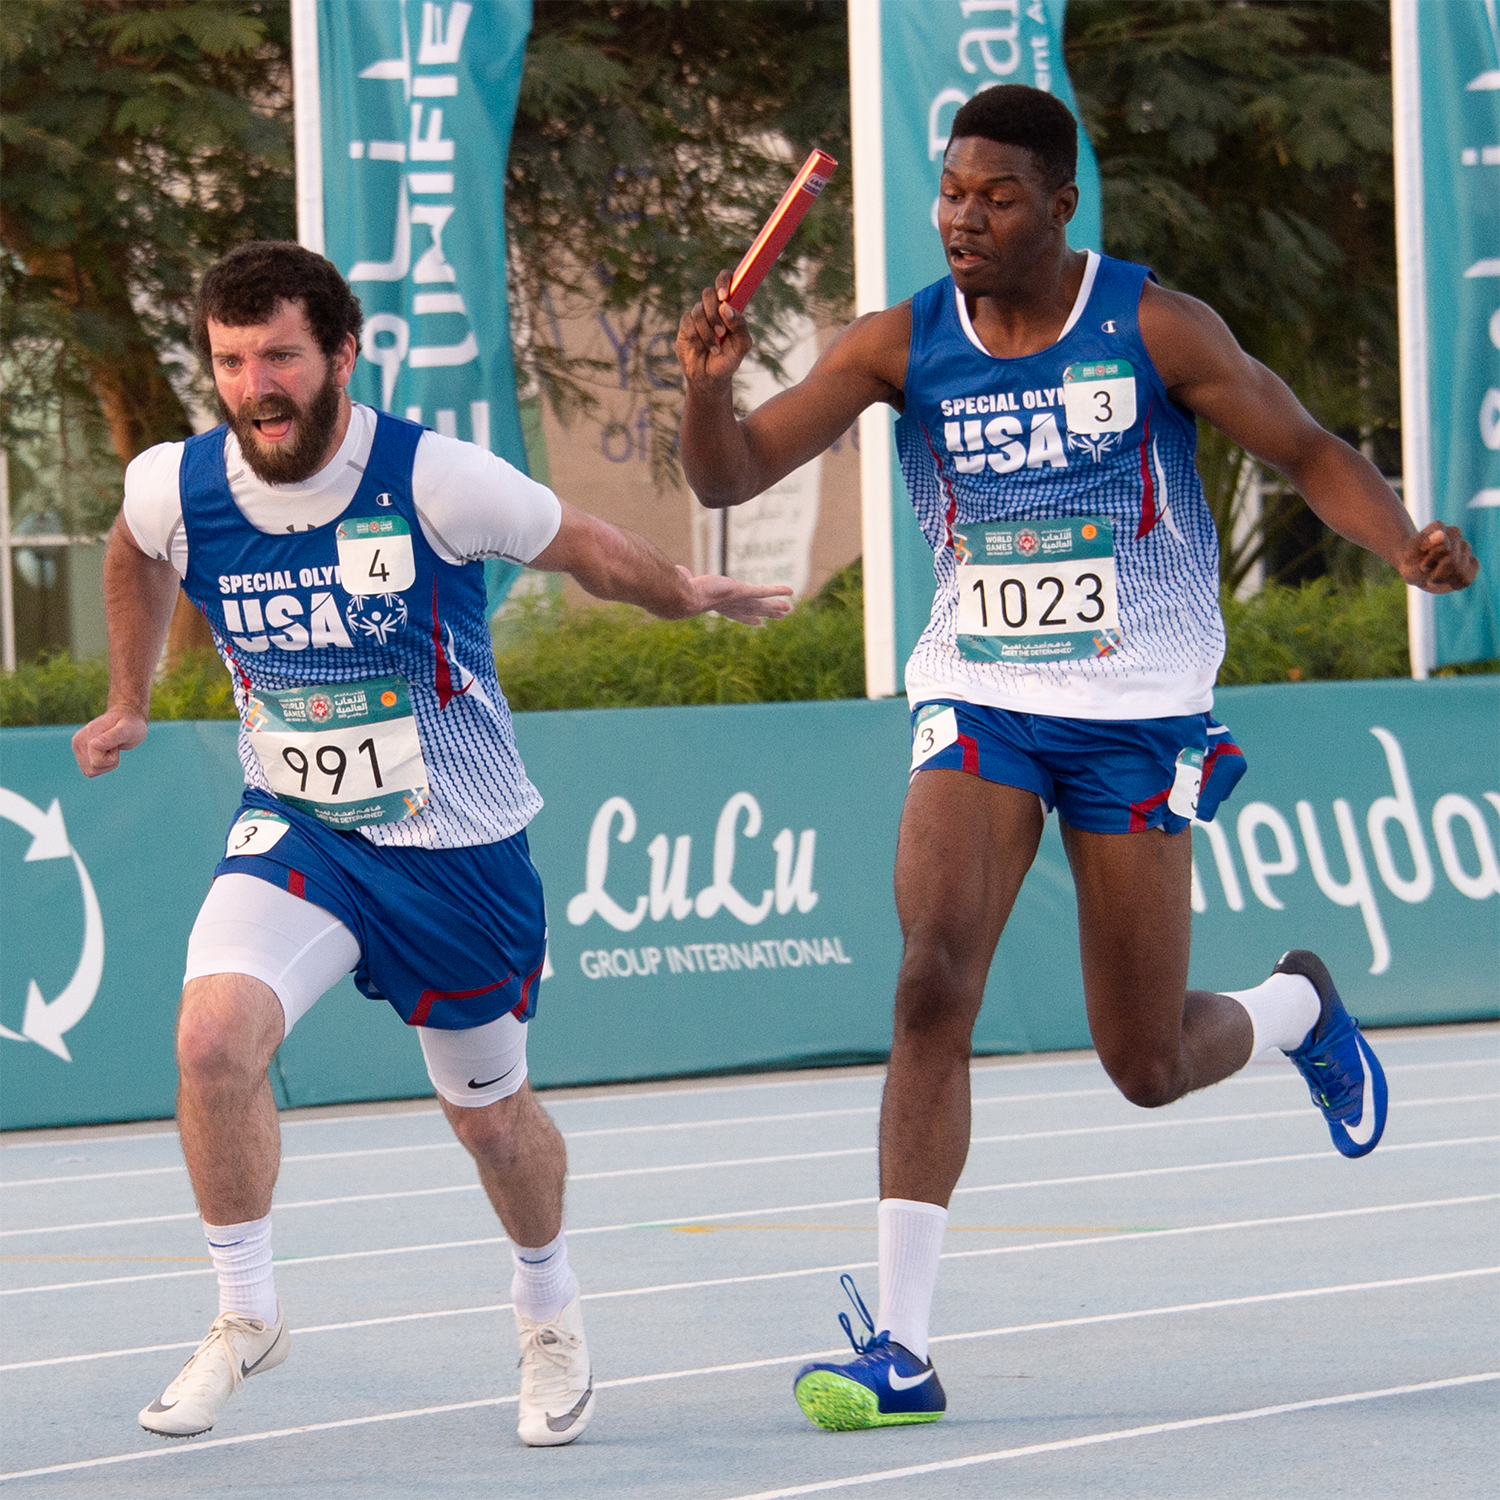 Chris Tucker (right) competes in a track and field relay at the 2019 World Games